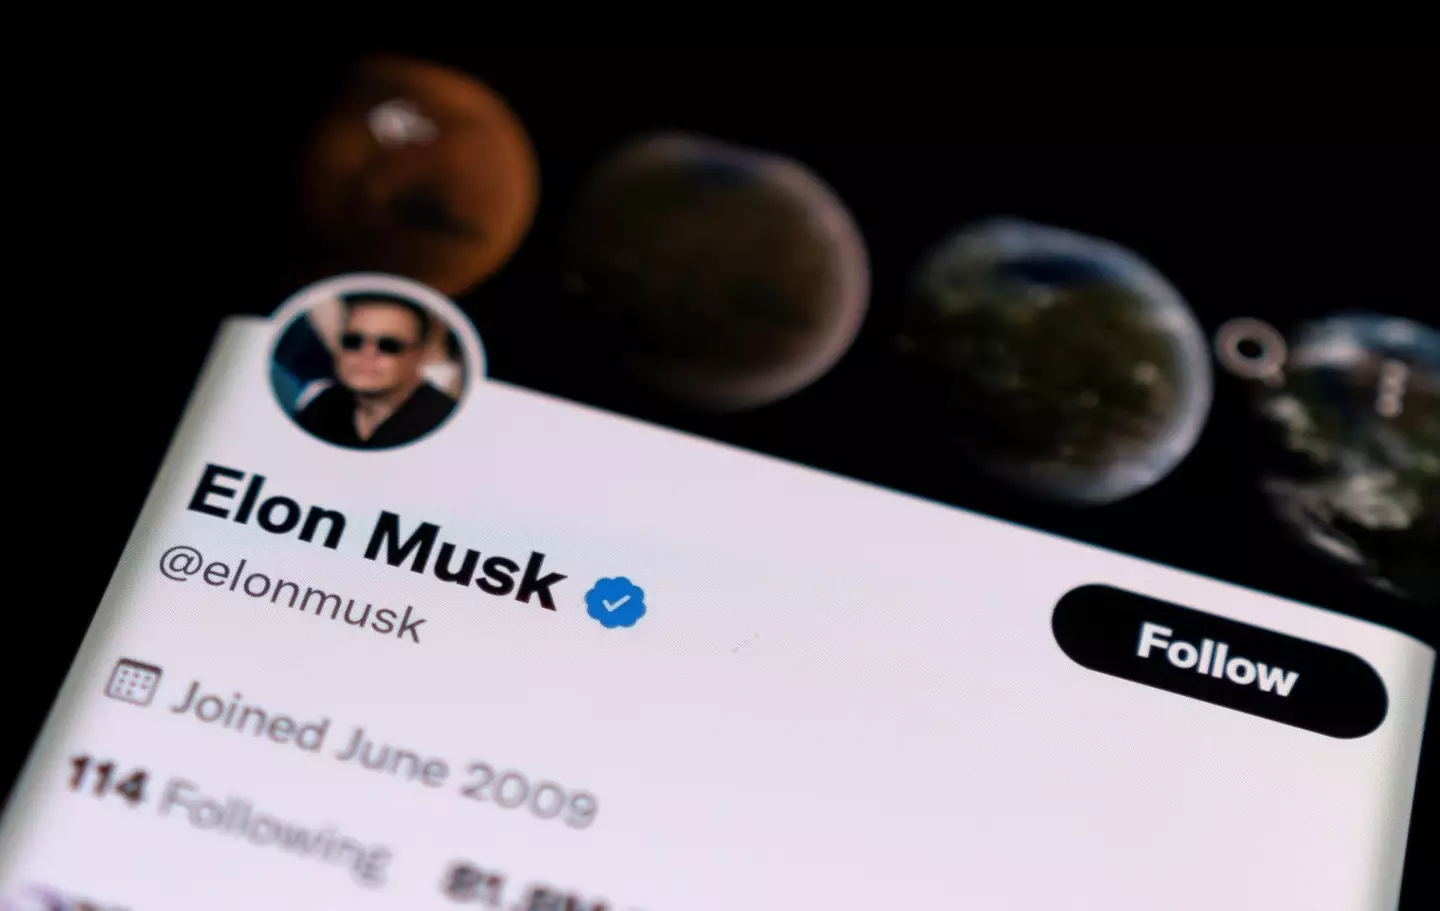 Musk is a prolific tweeter, and a 'fantastically talented troll', according to Wales.